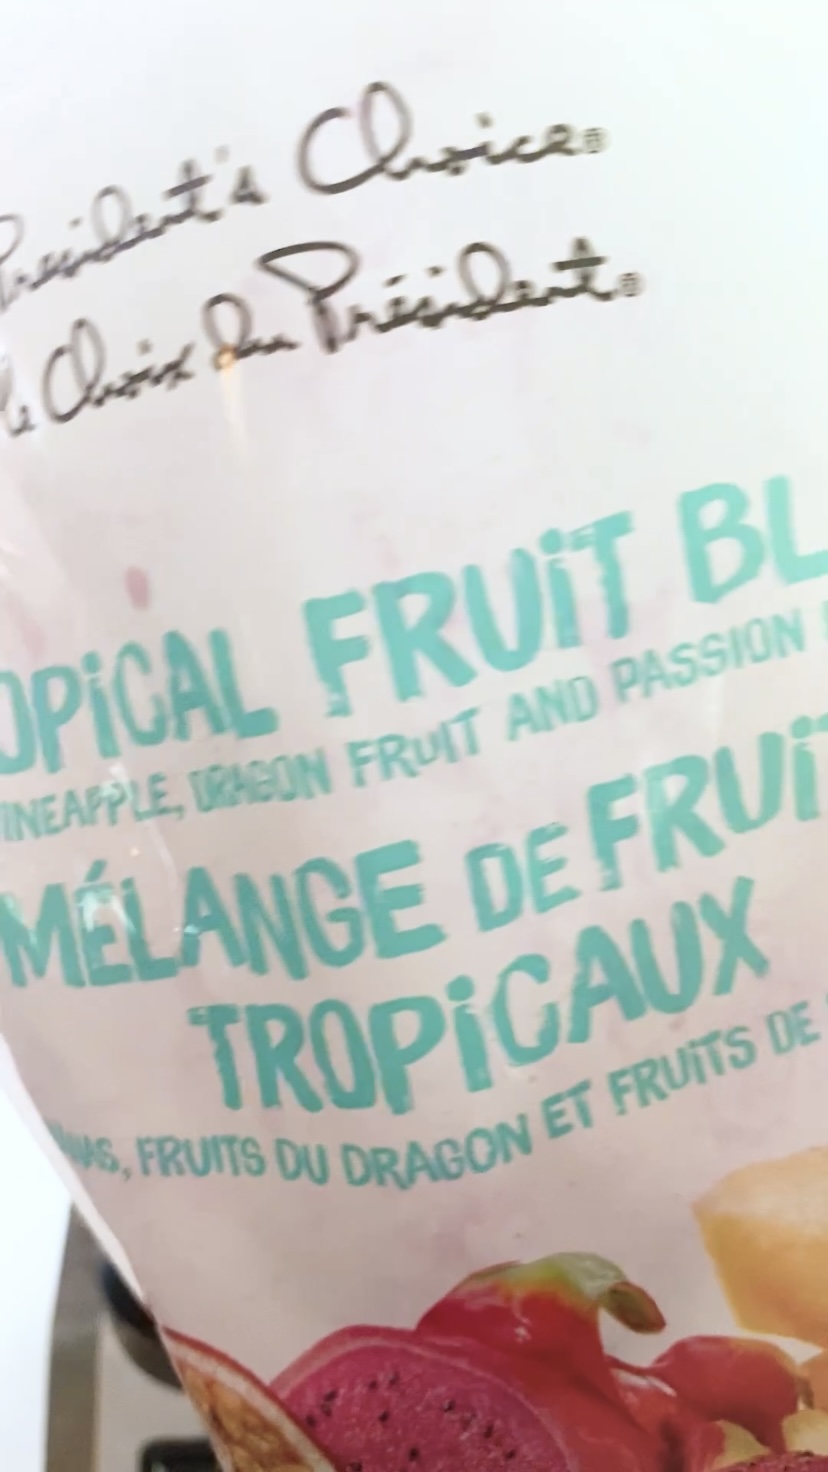 A bag of frozen fruit blend of pineapple, dragon fruit and passion fruit.